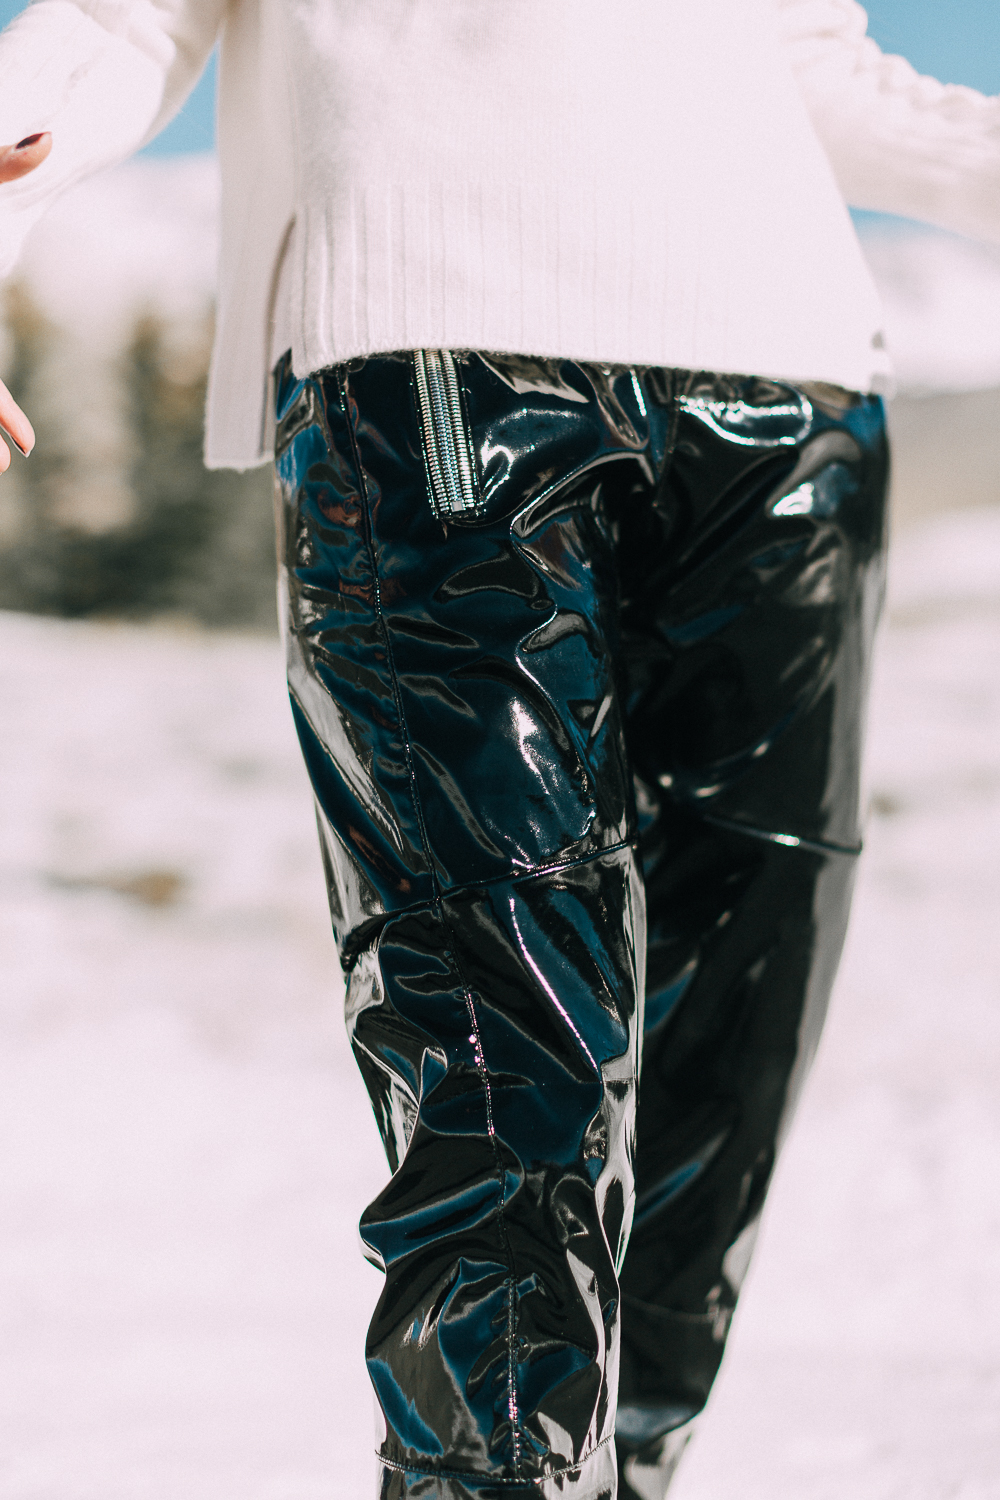 Fashion blogger Erin Busbee of BusbeeStyle.com wearing black vinyl pants by RtA with a white cashmere sweater by Brochu Walker in Telluride, Colorado